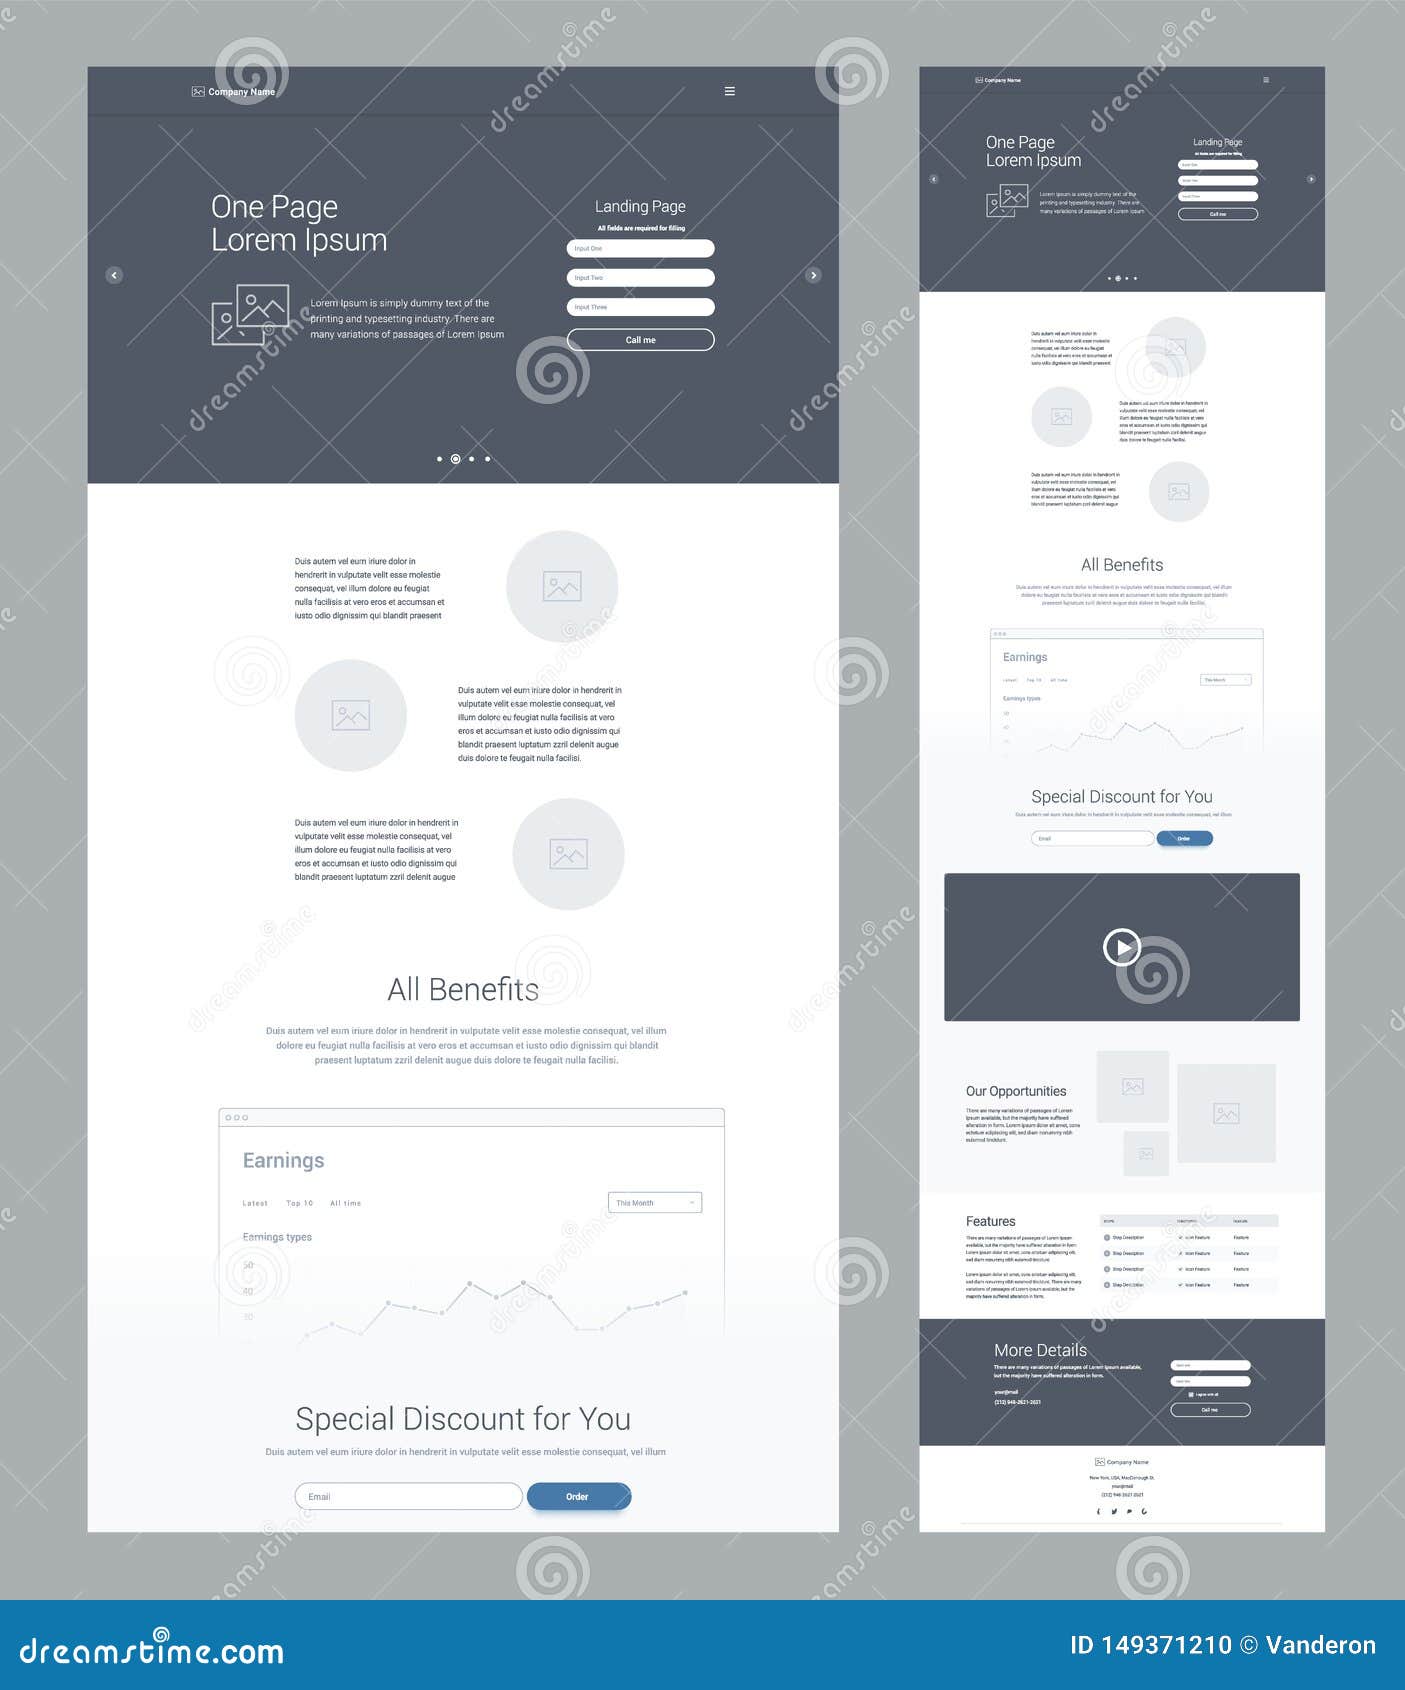 One Page Website Design Template for Business. Landing Page With Regard To One Page Business Website Template